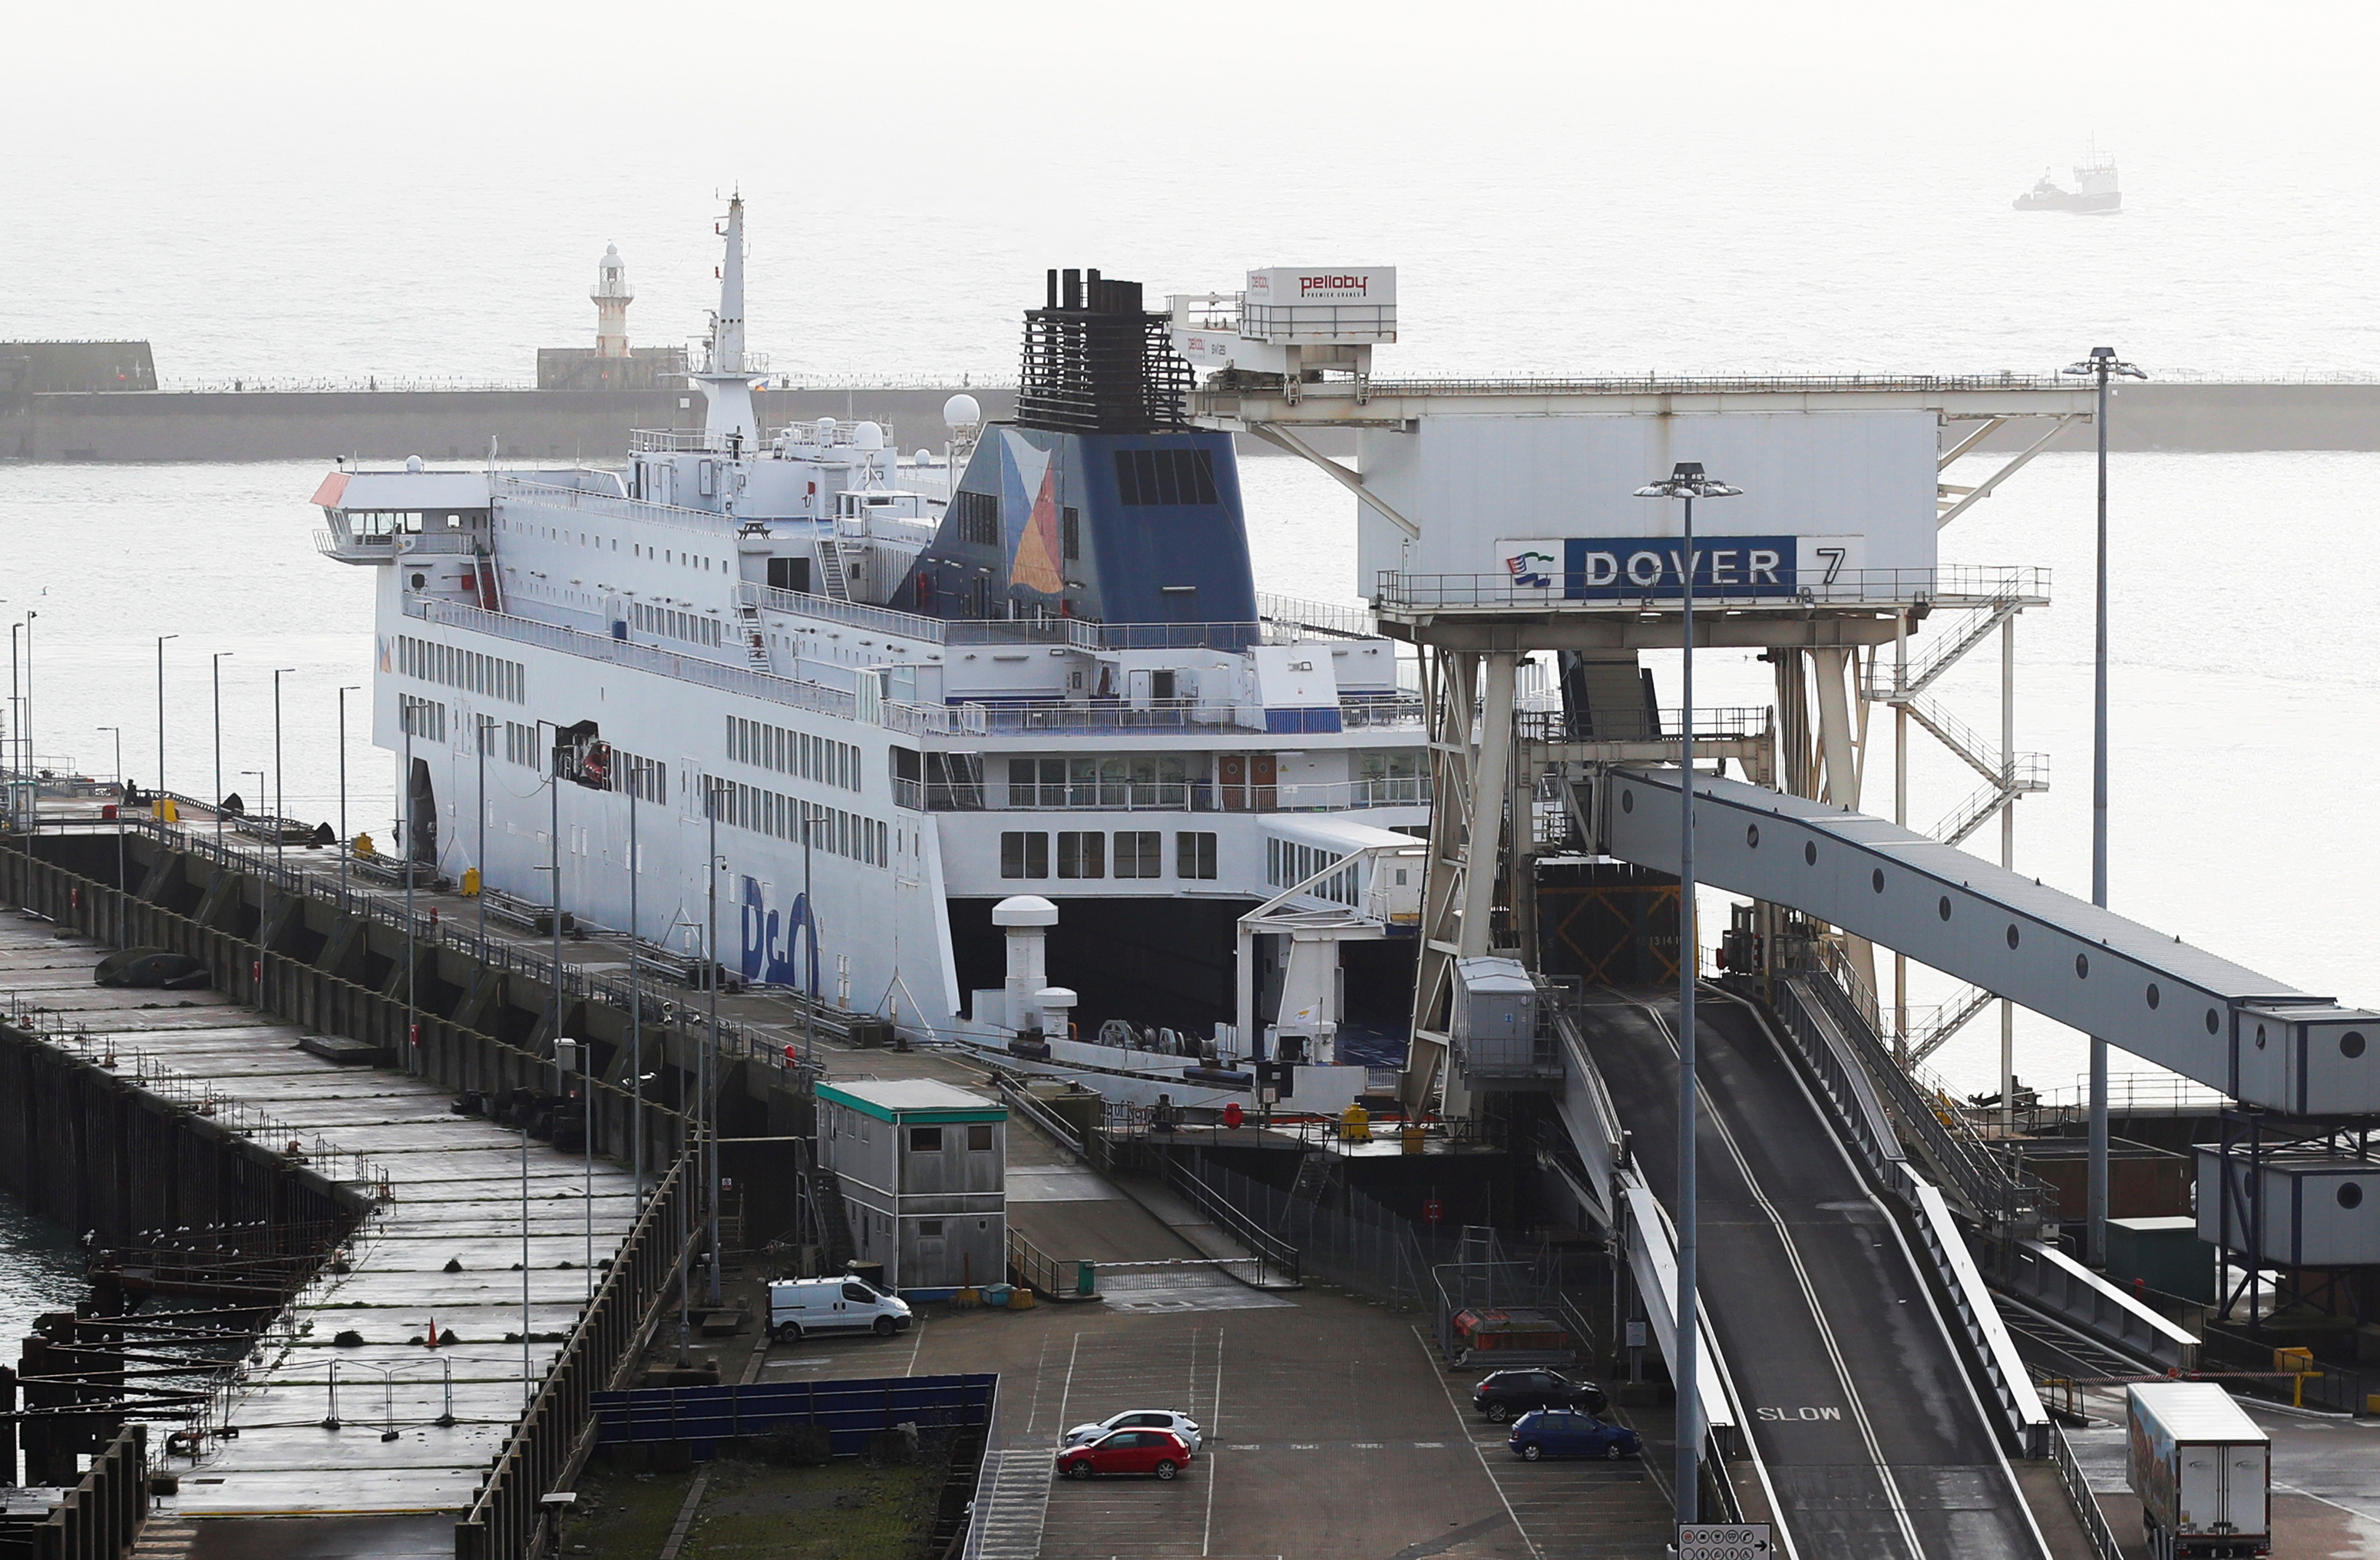 Ferry of the trans-Channel ferry company P&O docks at the Port of Dover